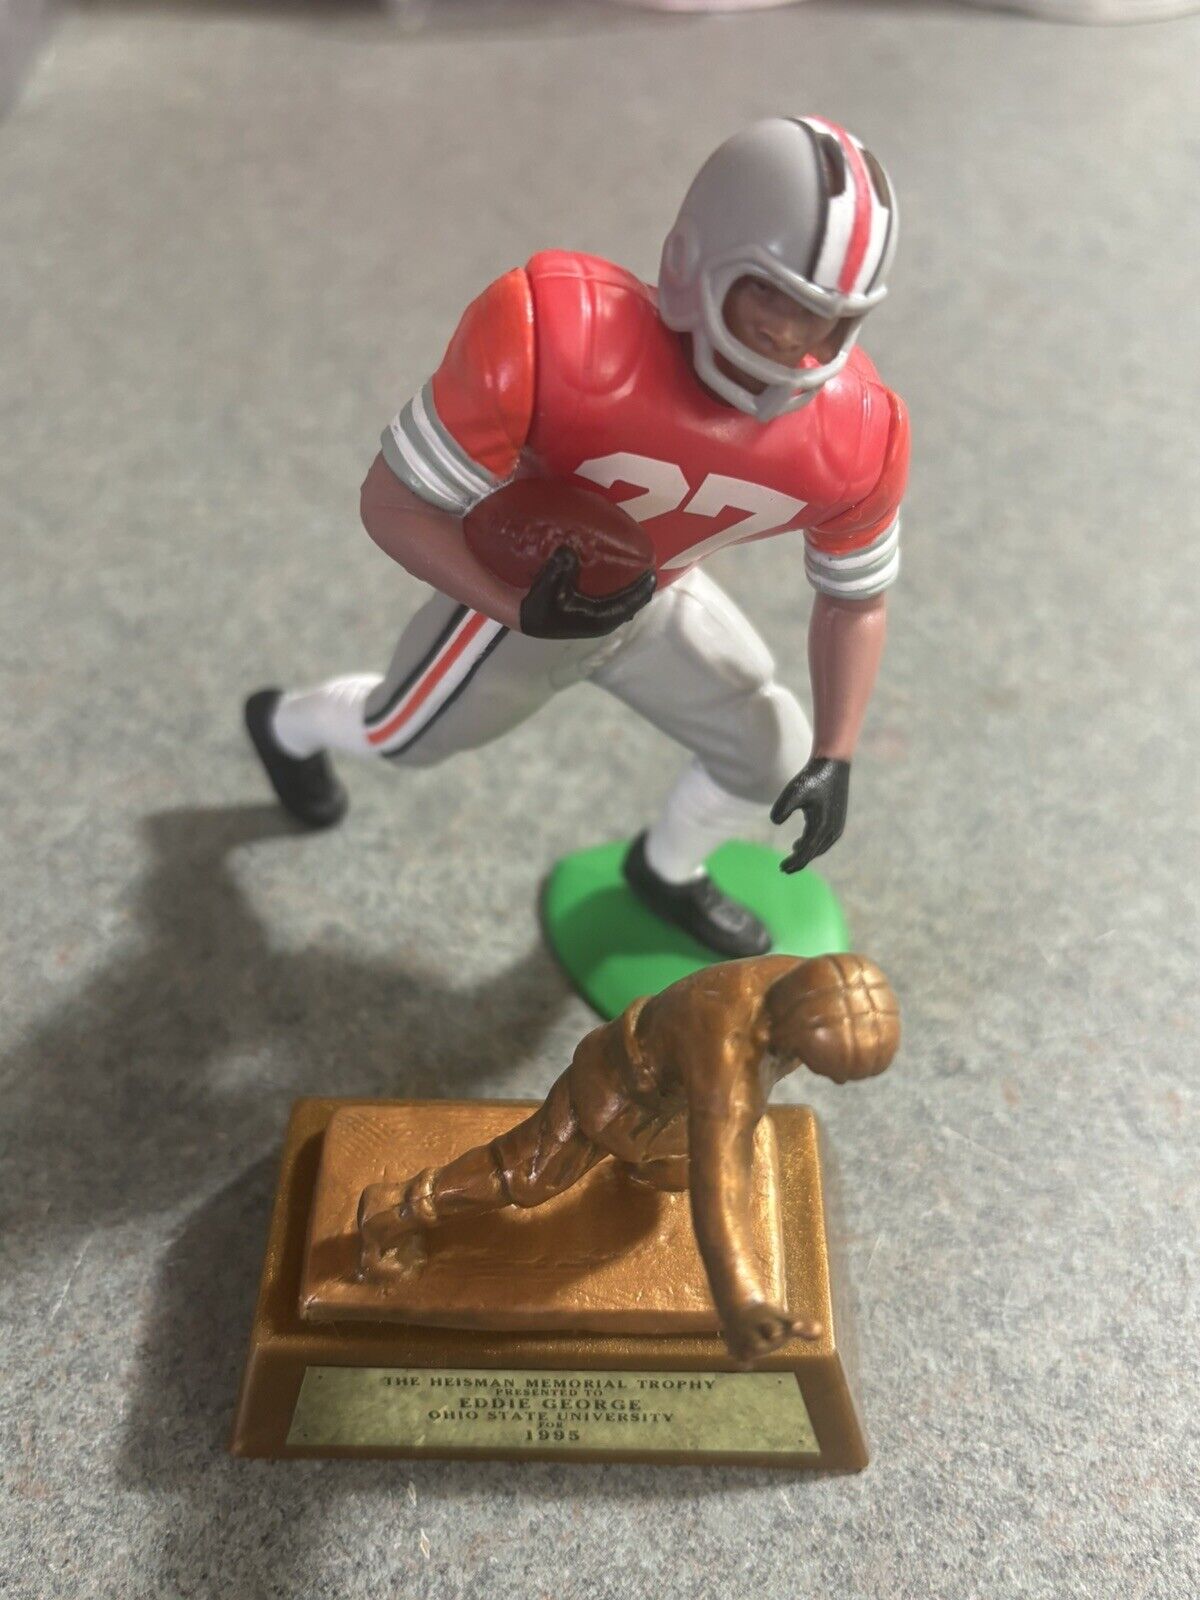 Kenner Starting Lineup Heisman Collection EDDIE GEORGE OPEN FIGURE WITH TROPHY